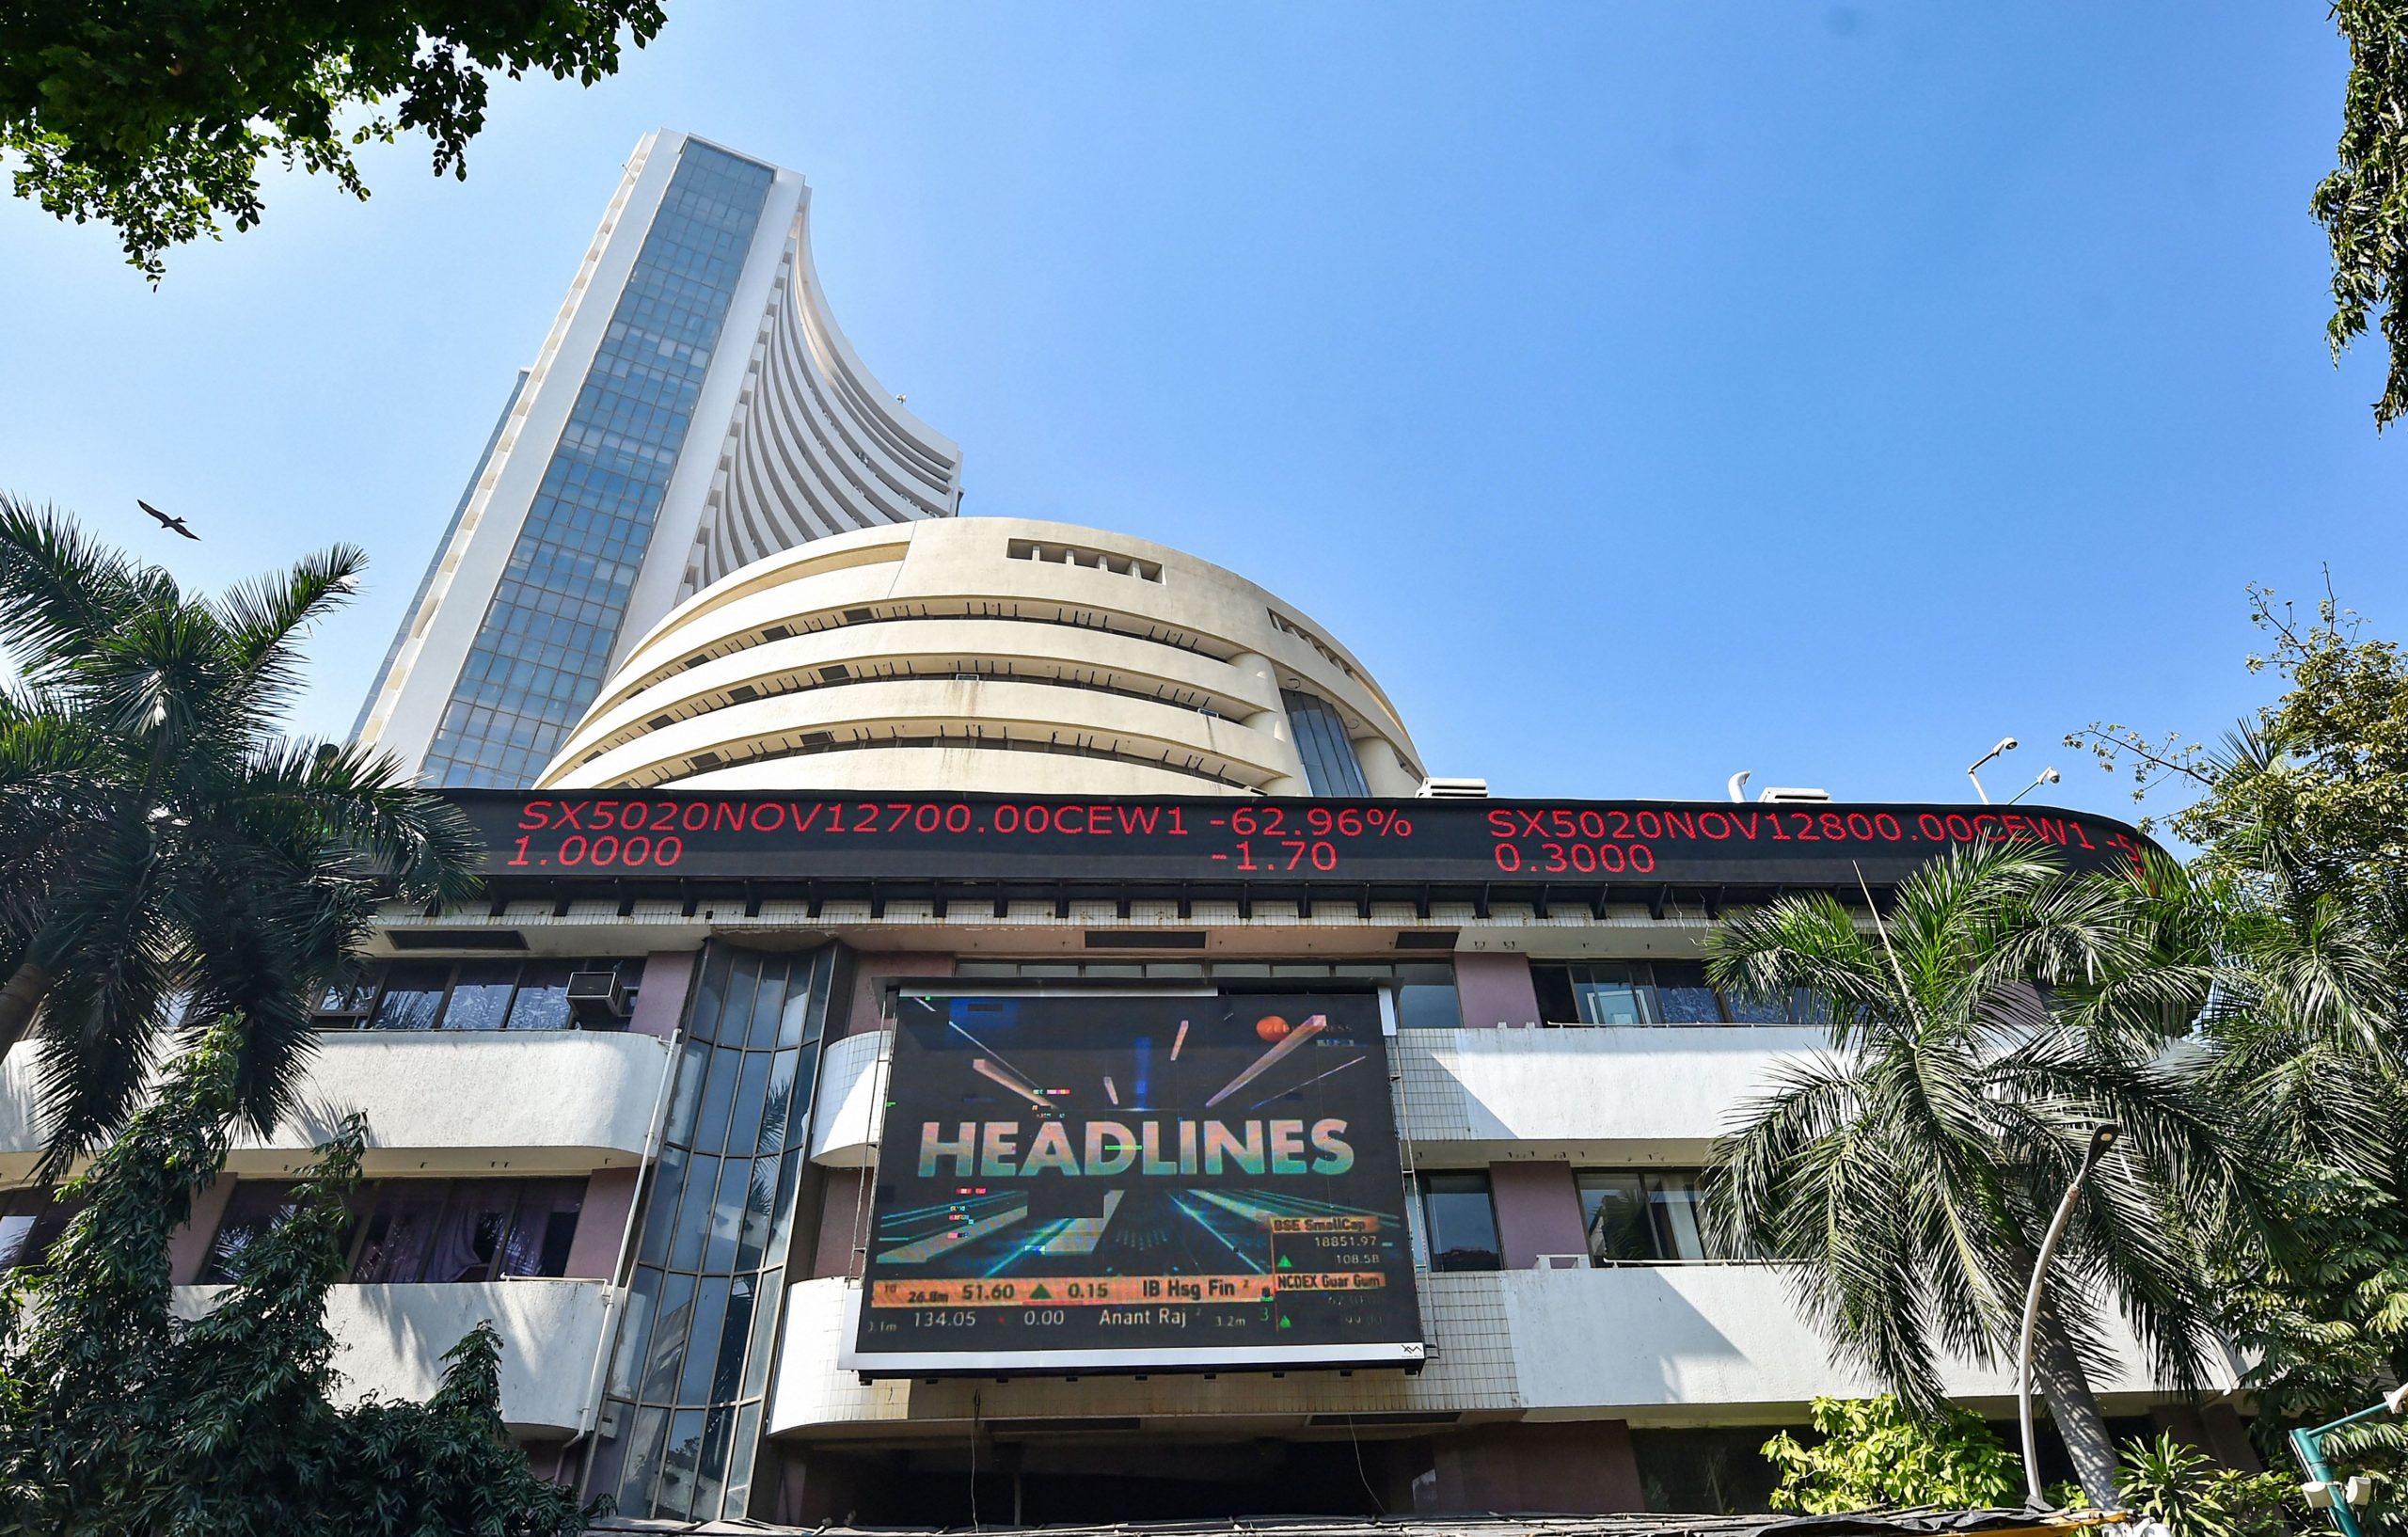 Trending Stocks: Adani, IndusInd Bank, L&T and others in news today